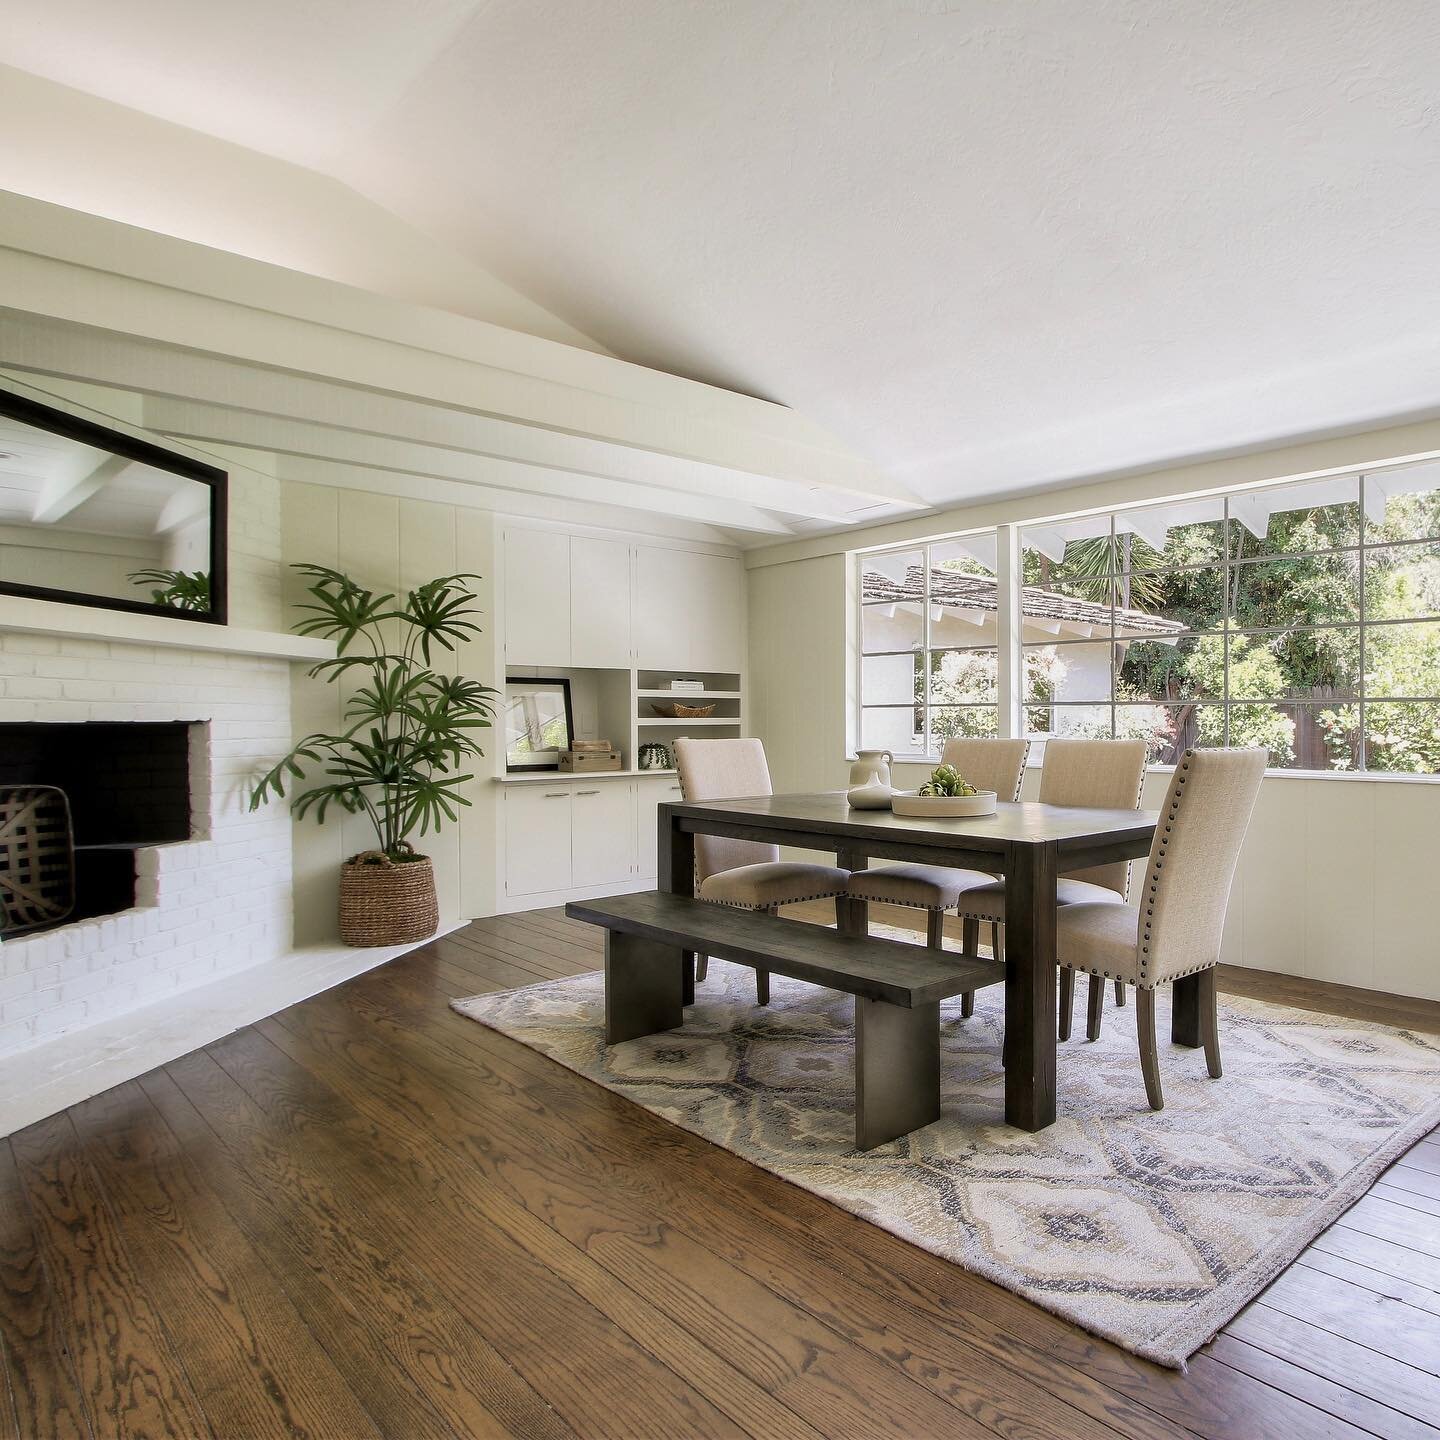 Sold 📍Palo Alto

We #PropertyNerds love this Historic Spanish/California Mission style architectural details throughout the home. Dramatic family/dining room combination features corner brick fireplace, open beamed/cathedral ceiling and large pictur